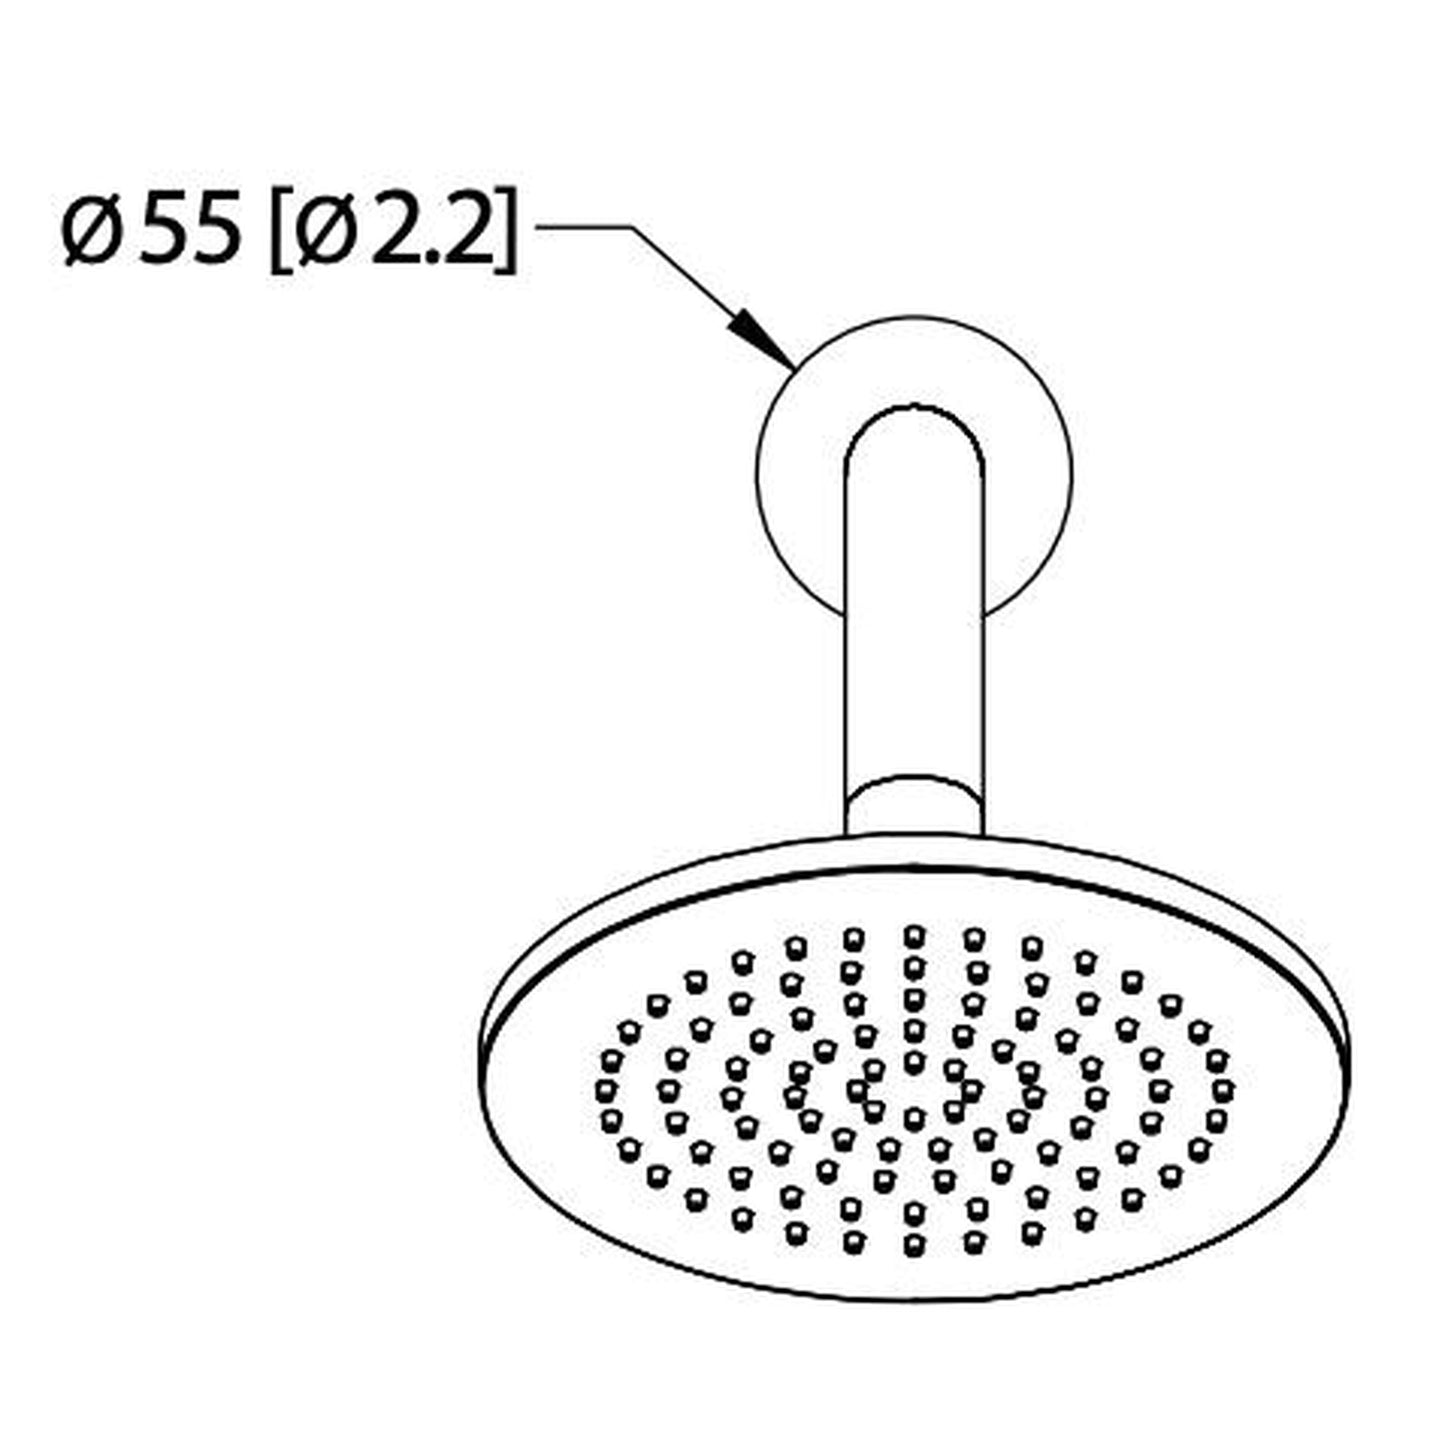 Isenberg Universal Fixtures 6" Single Function Round Chrome Solid Brass Rain Shower Head With 7" Wall Mounted Shower Arm